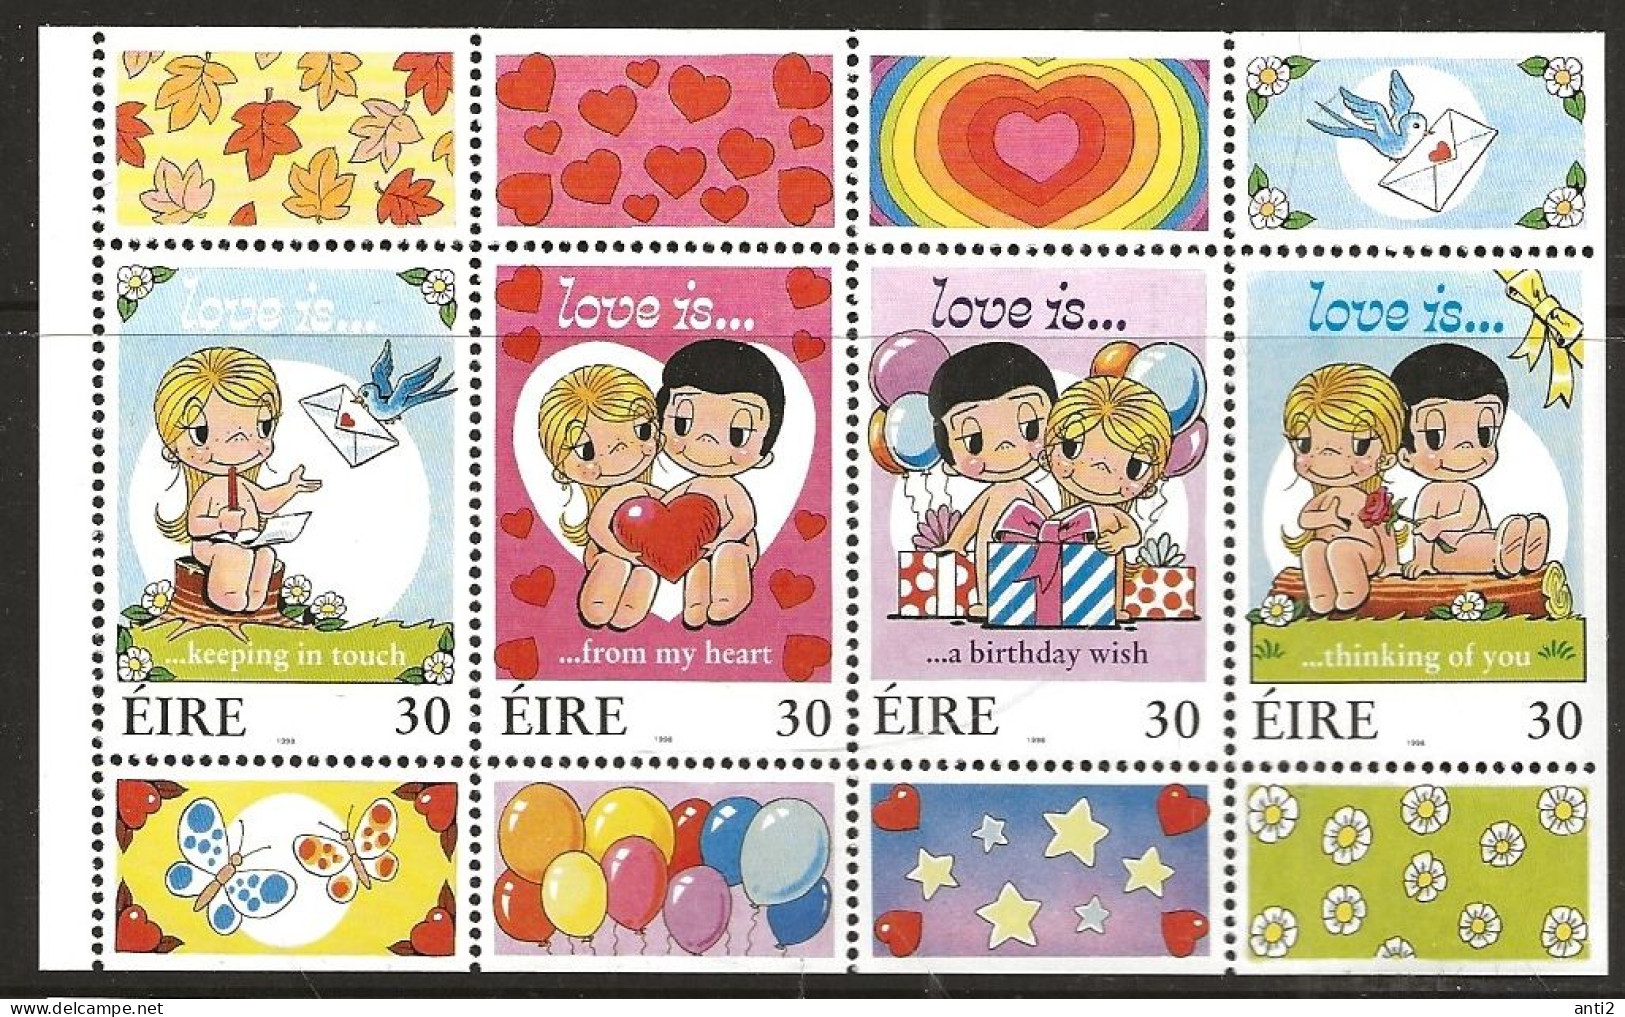 Ireland 1998 Greeting Stamps,  Characters From The Cartoon Series "Love Is..."By Kim Casali  MI 1042- 1045 Sheet MNH(**) - Unused Stamps